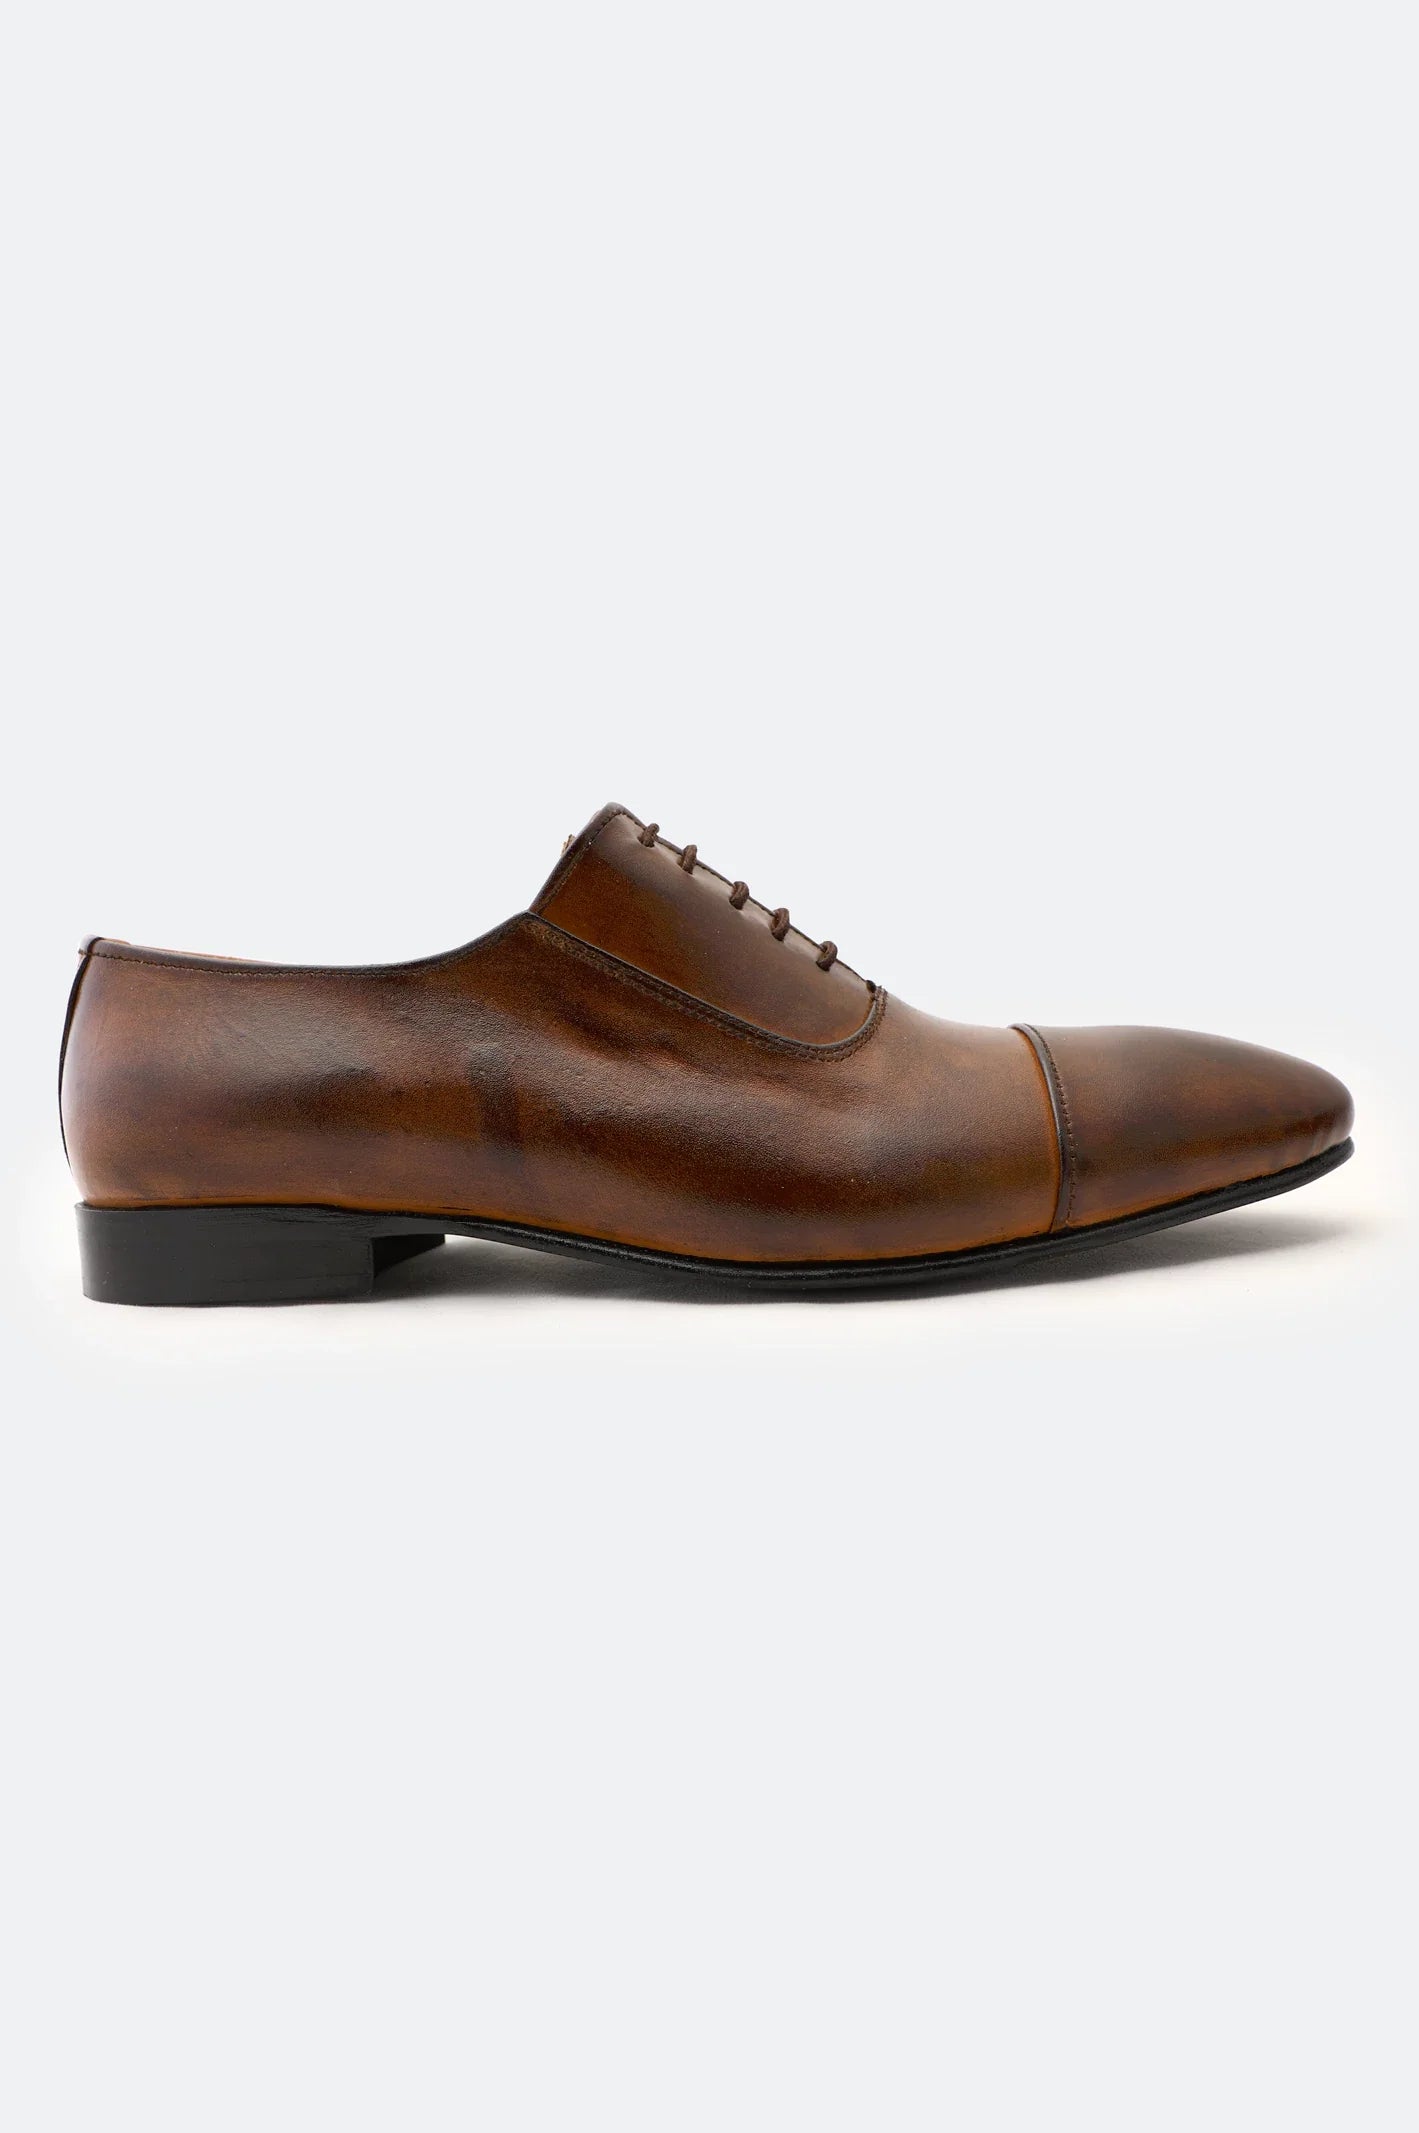 Brown Formal Shoes For Men From Diners